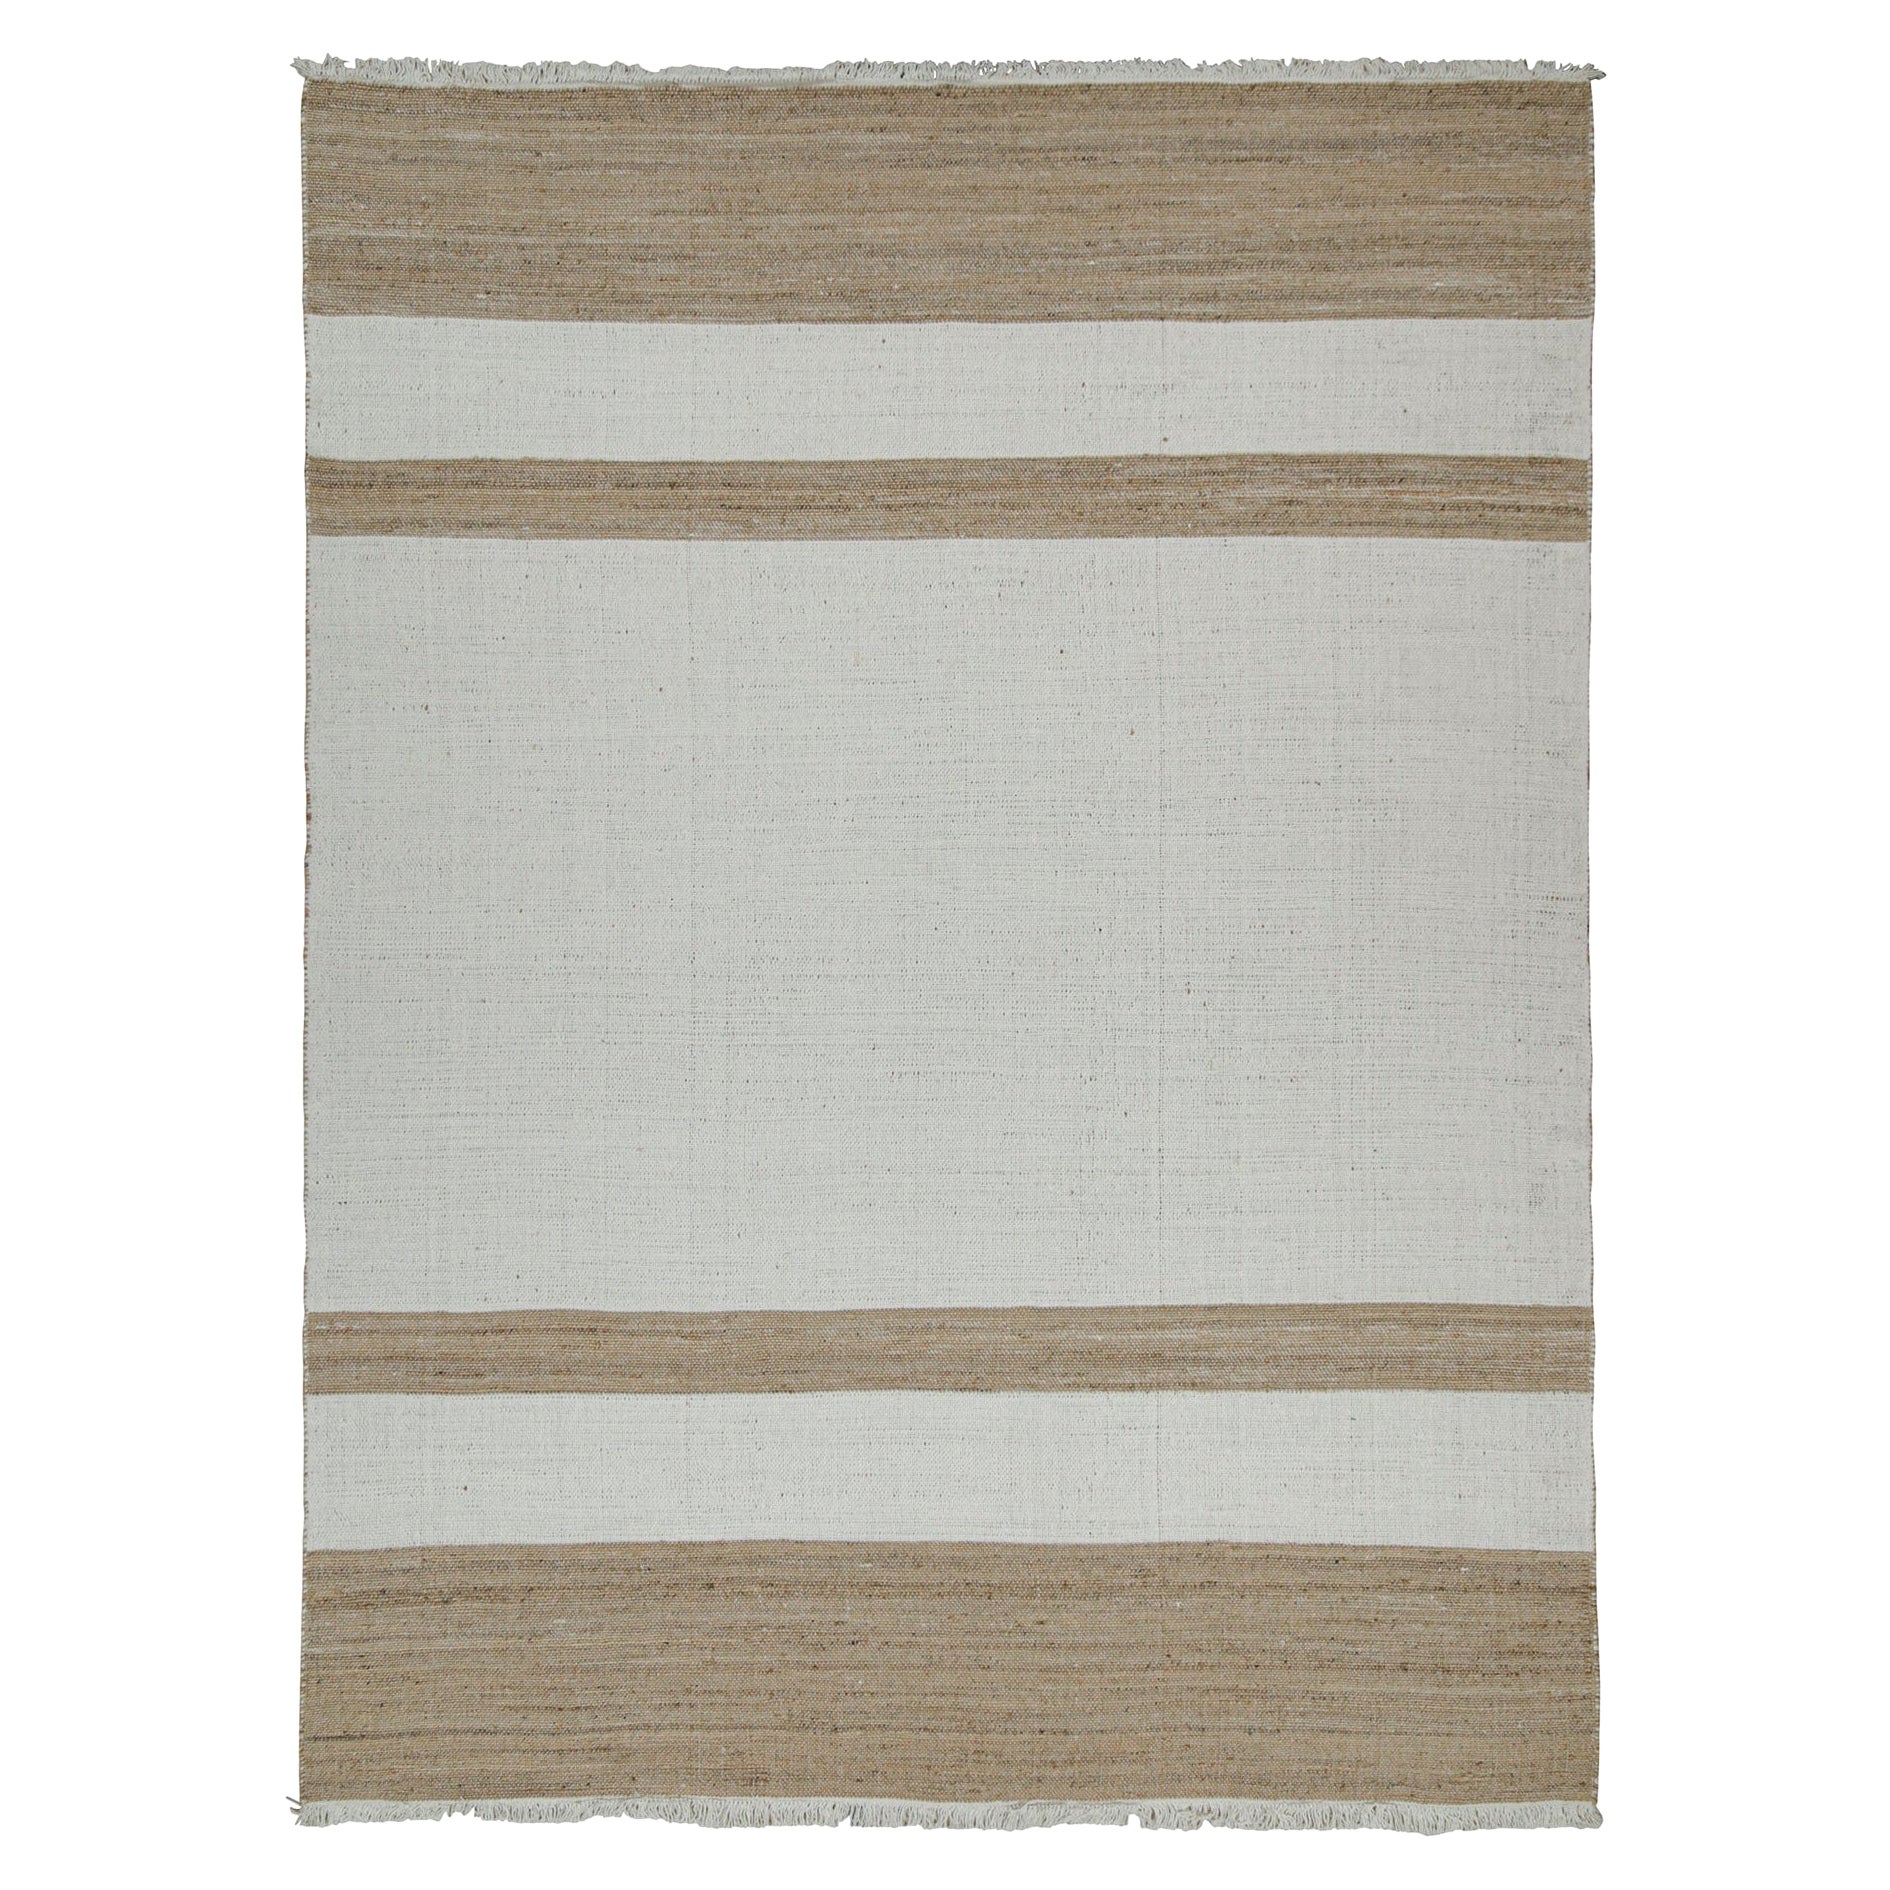 Rug & Kilim’s Contemporary Jute Flat Weave in White and Beige-Brown Stripes